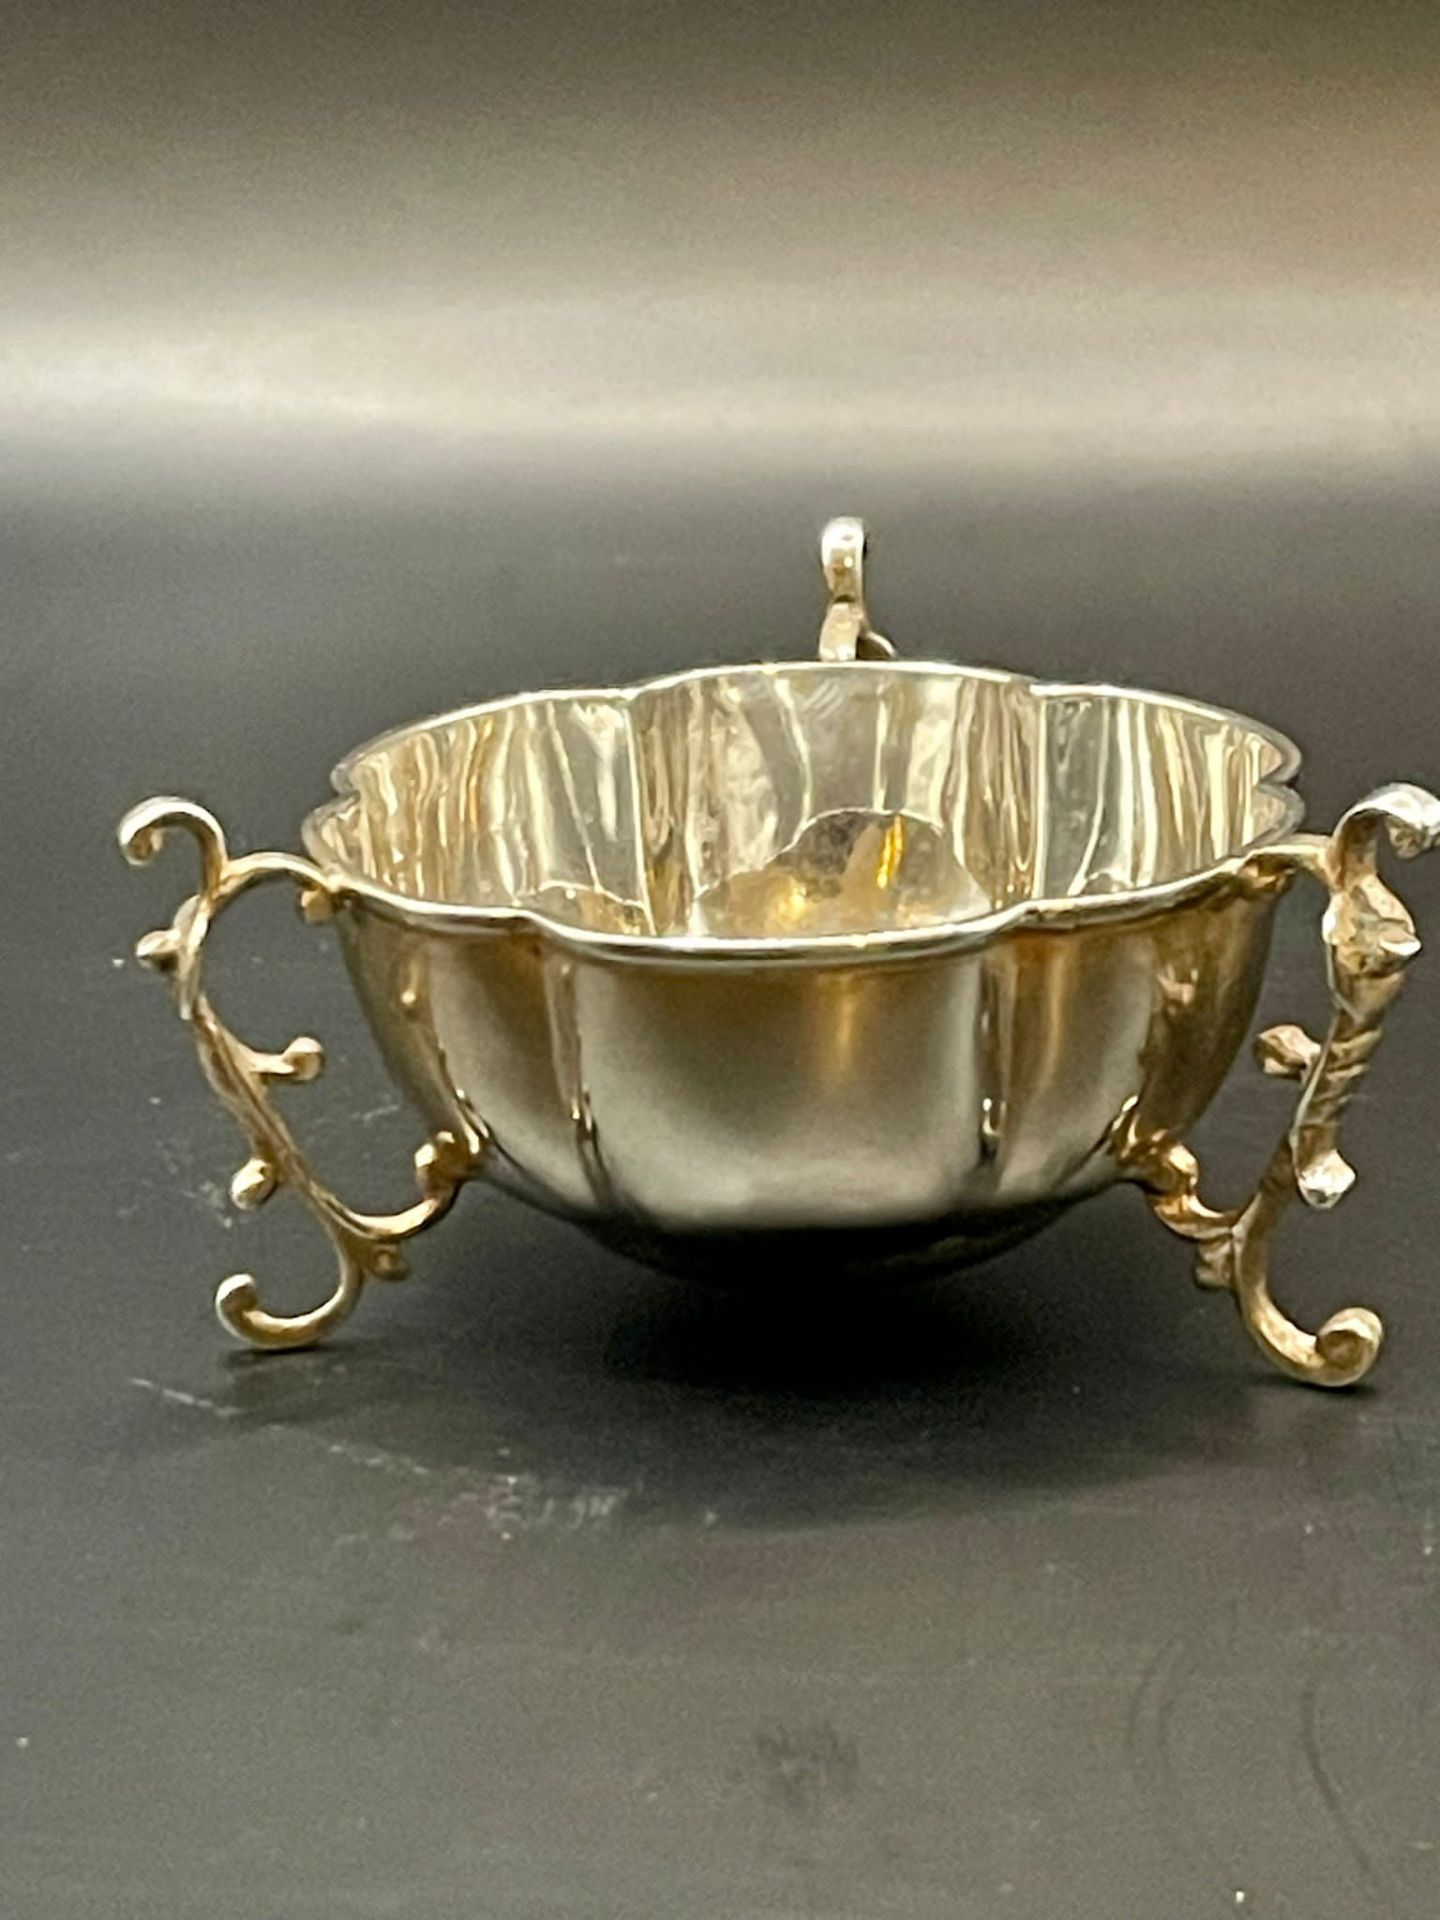 Antique Solid Silver Salt Dishes Fully Hallmarked .- JD over WD in lozenge for James Deakin & Sons J - Image 3 of 15